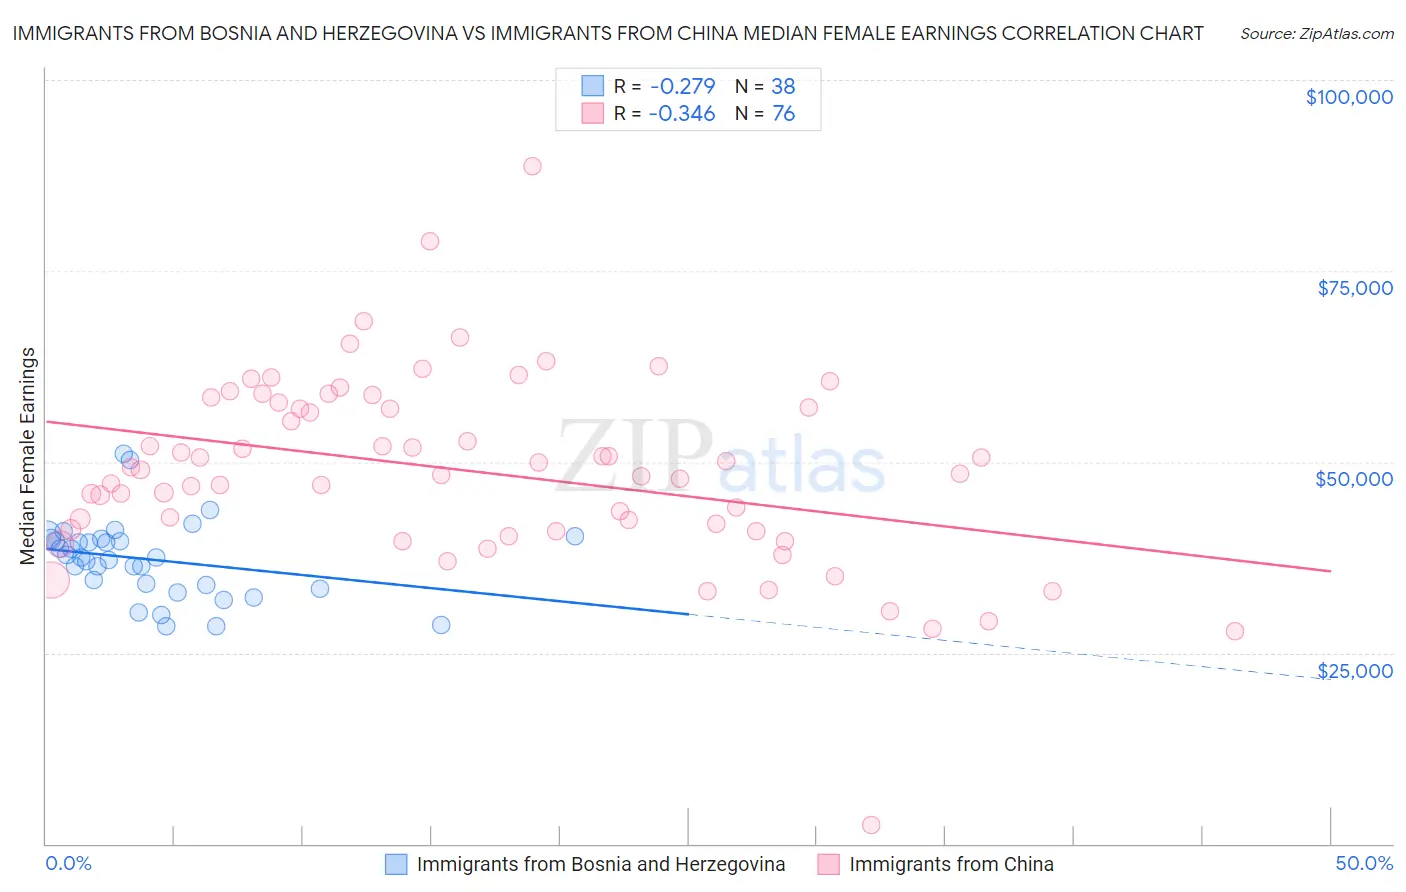 Immigrants from Bosnia and Herzegovina vs Immigrants from China Median Female Earnings